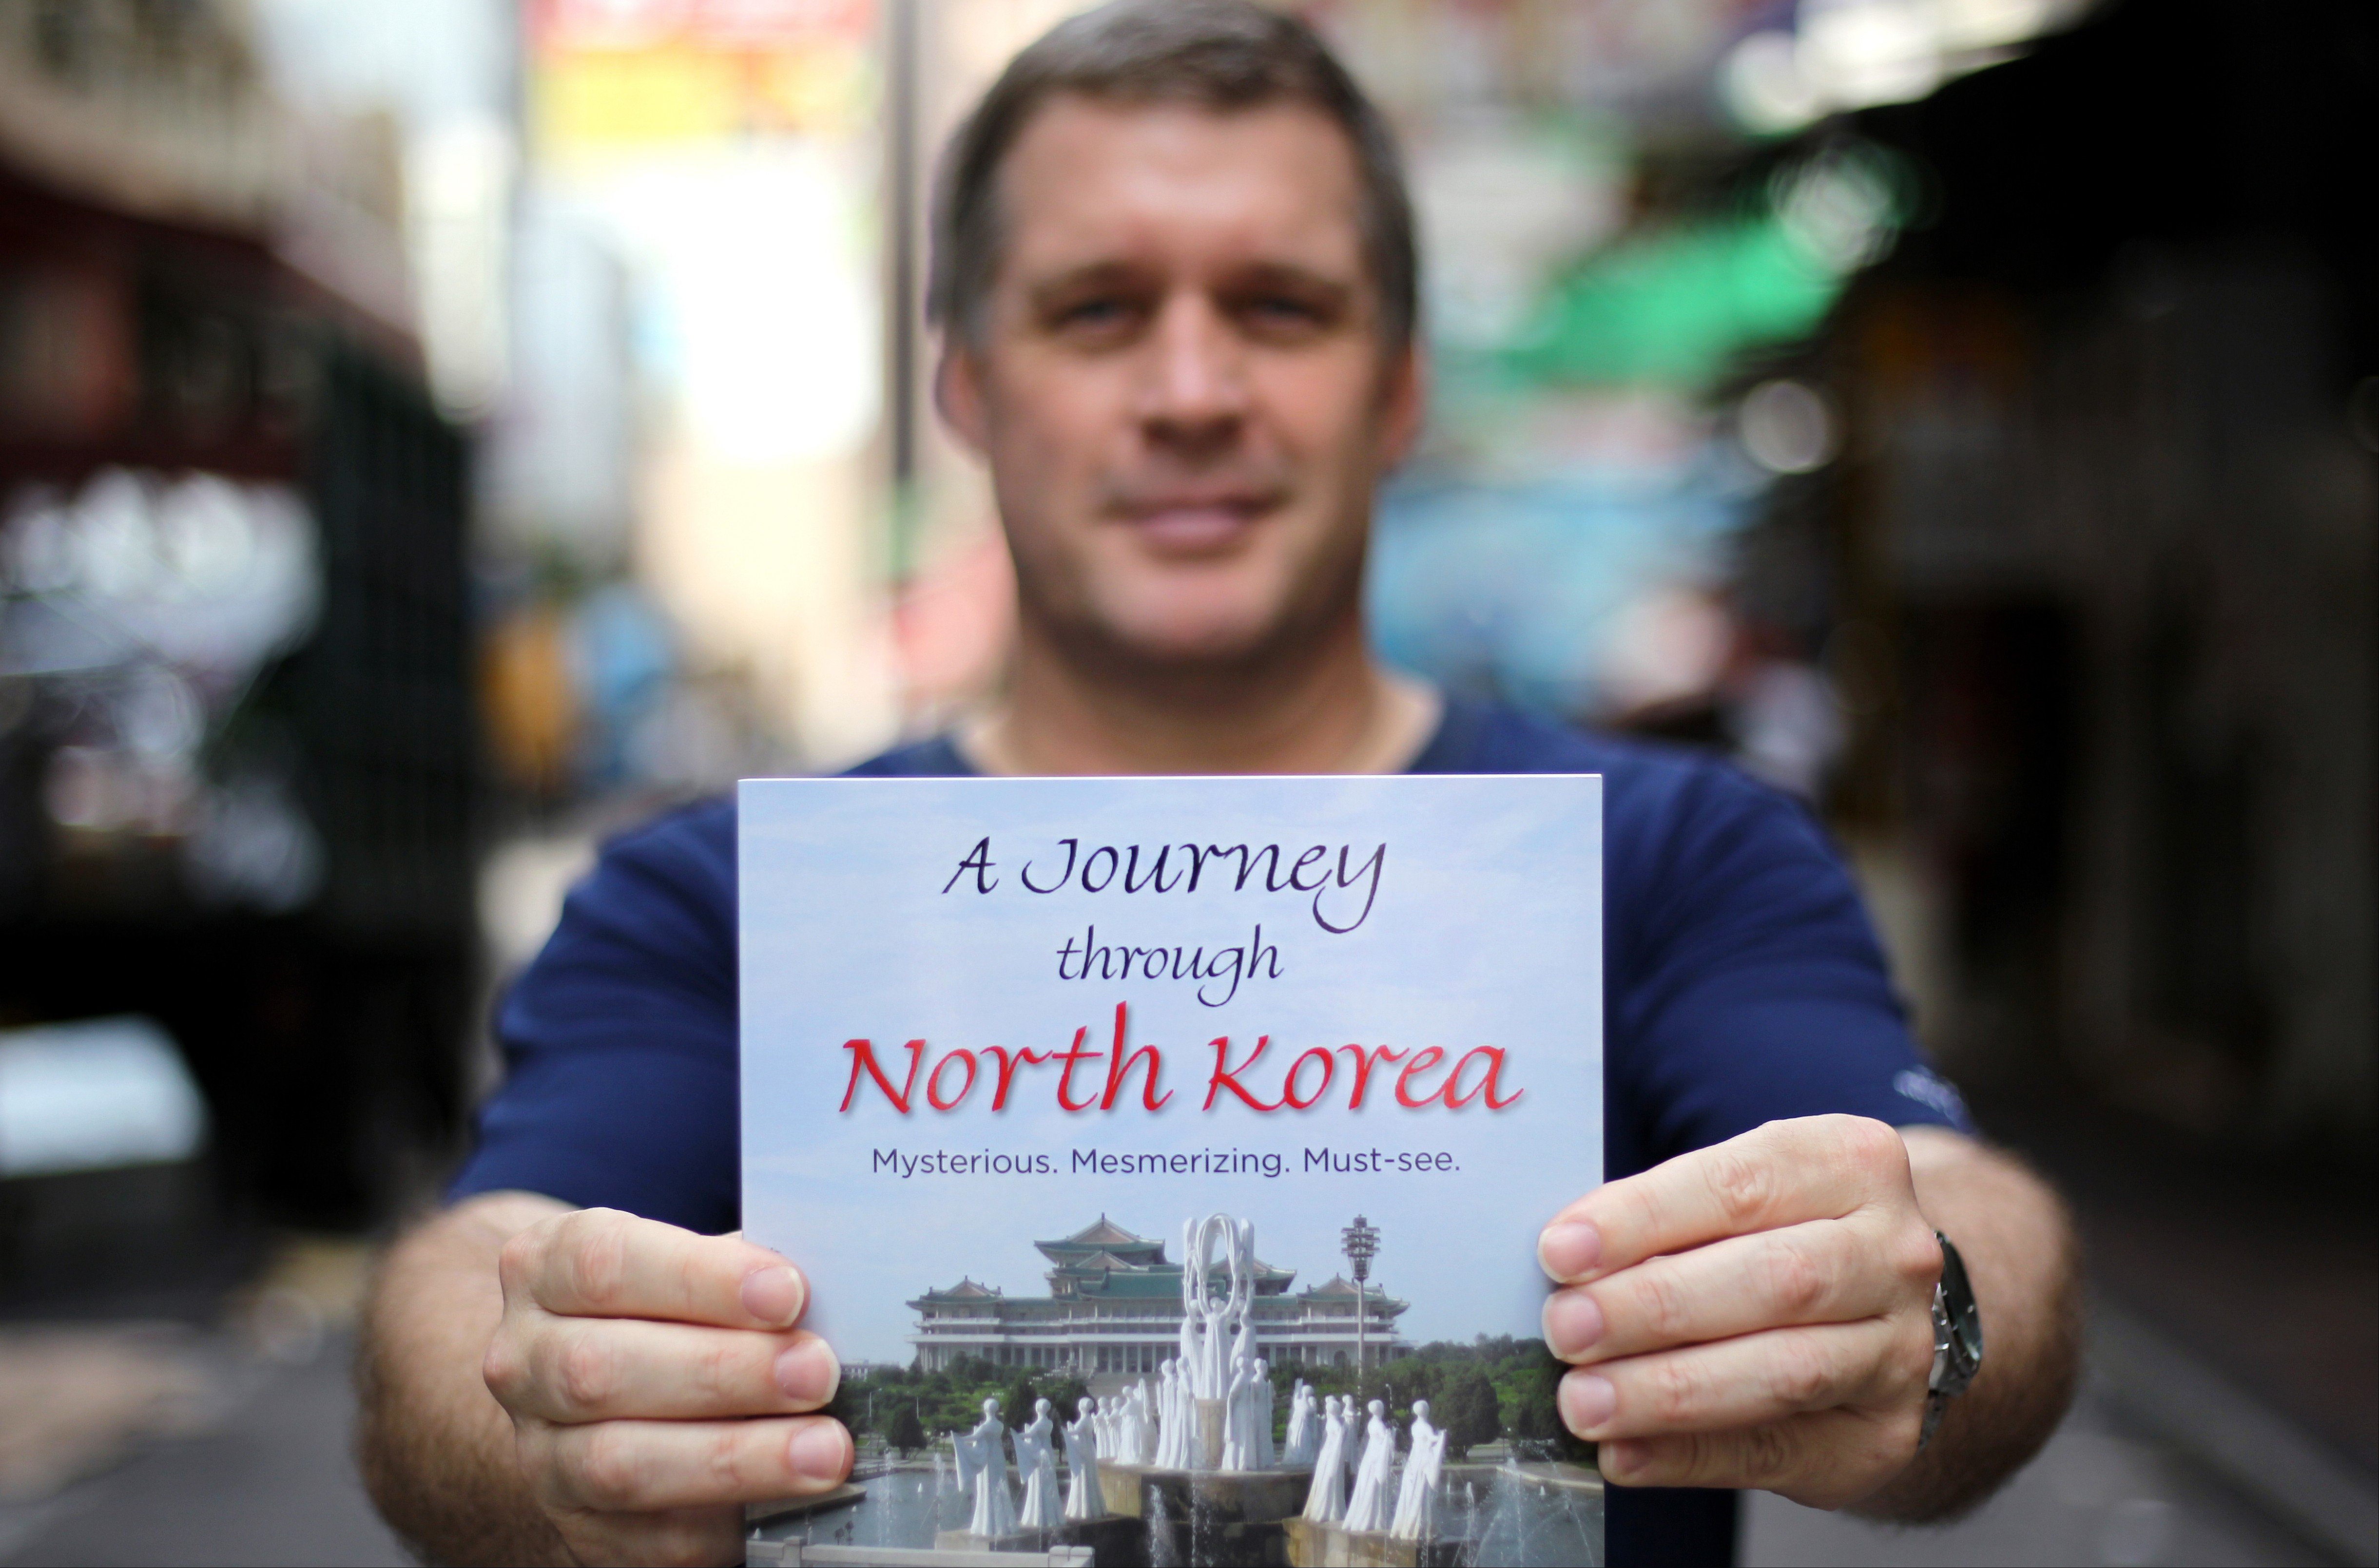 Ronny Mintjens first visited North Korea in 2006 and has since organised tours to the secretive country. Photo: Roy Issa